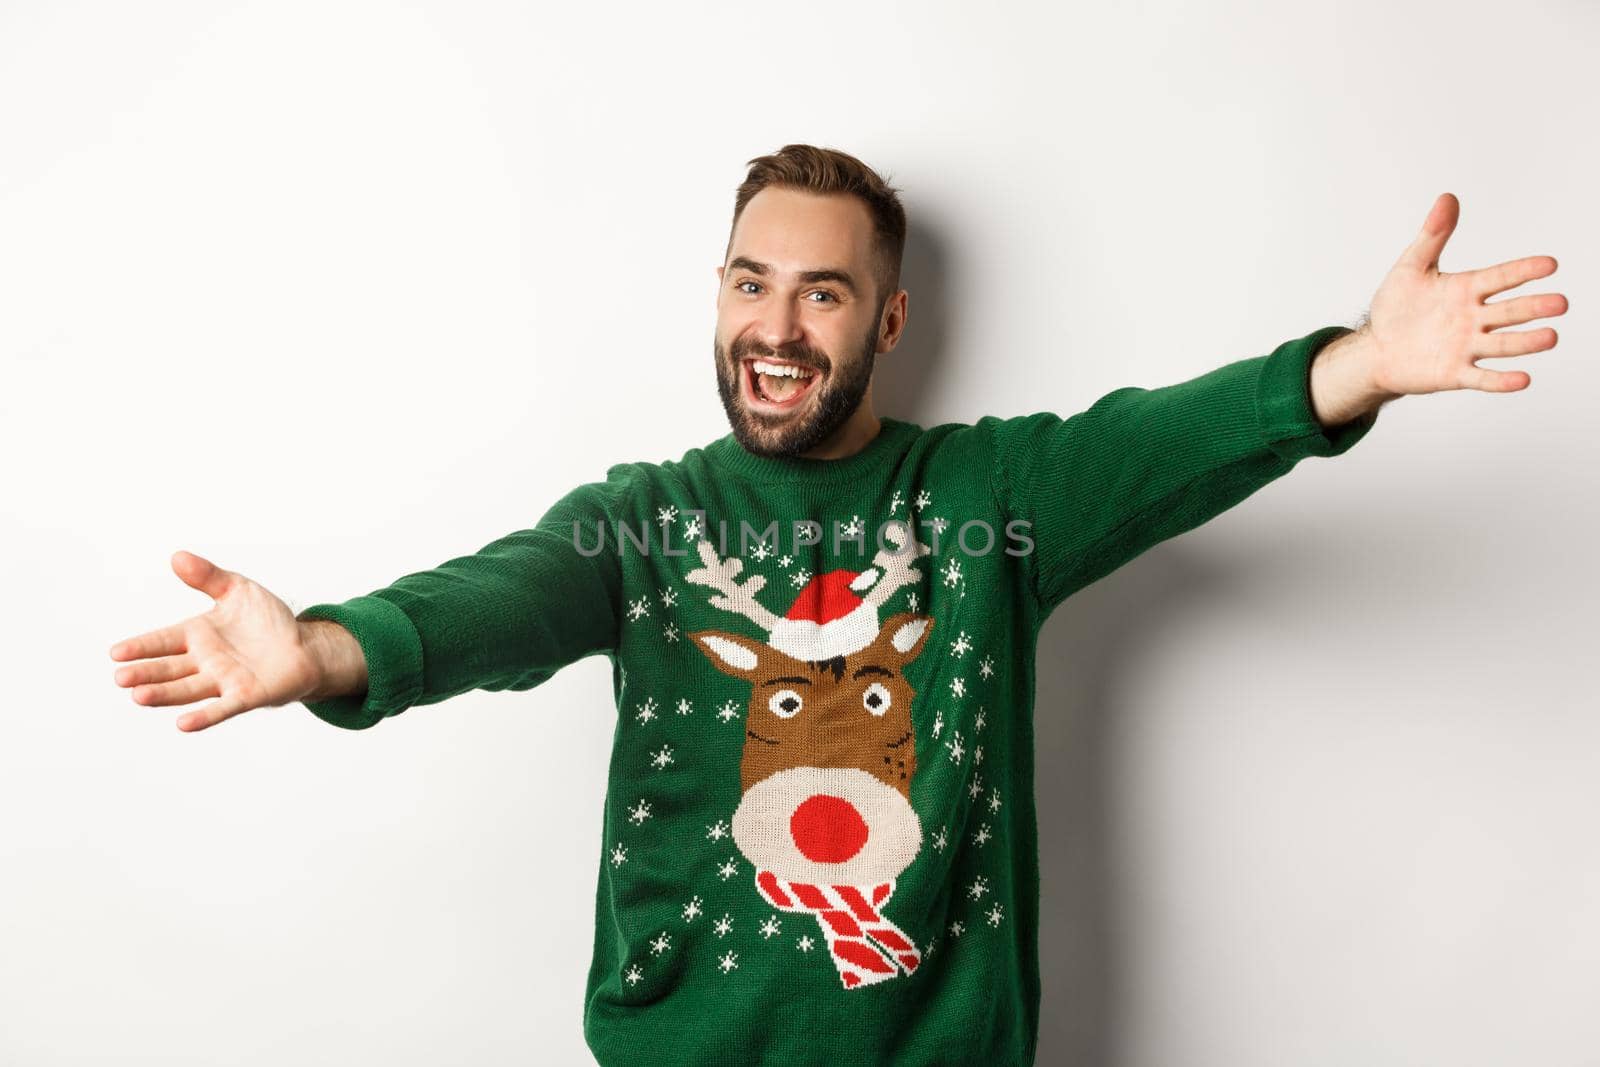 New year celebration and winter holidays concept. Friendly man spread hands for hug, welcome to Christmas party, wearing funny sweater, white background.